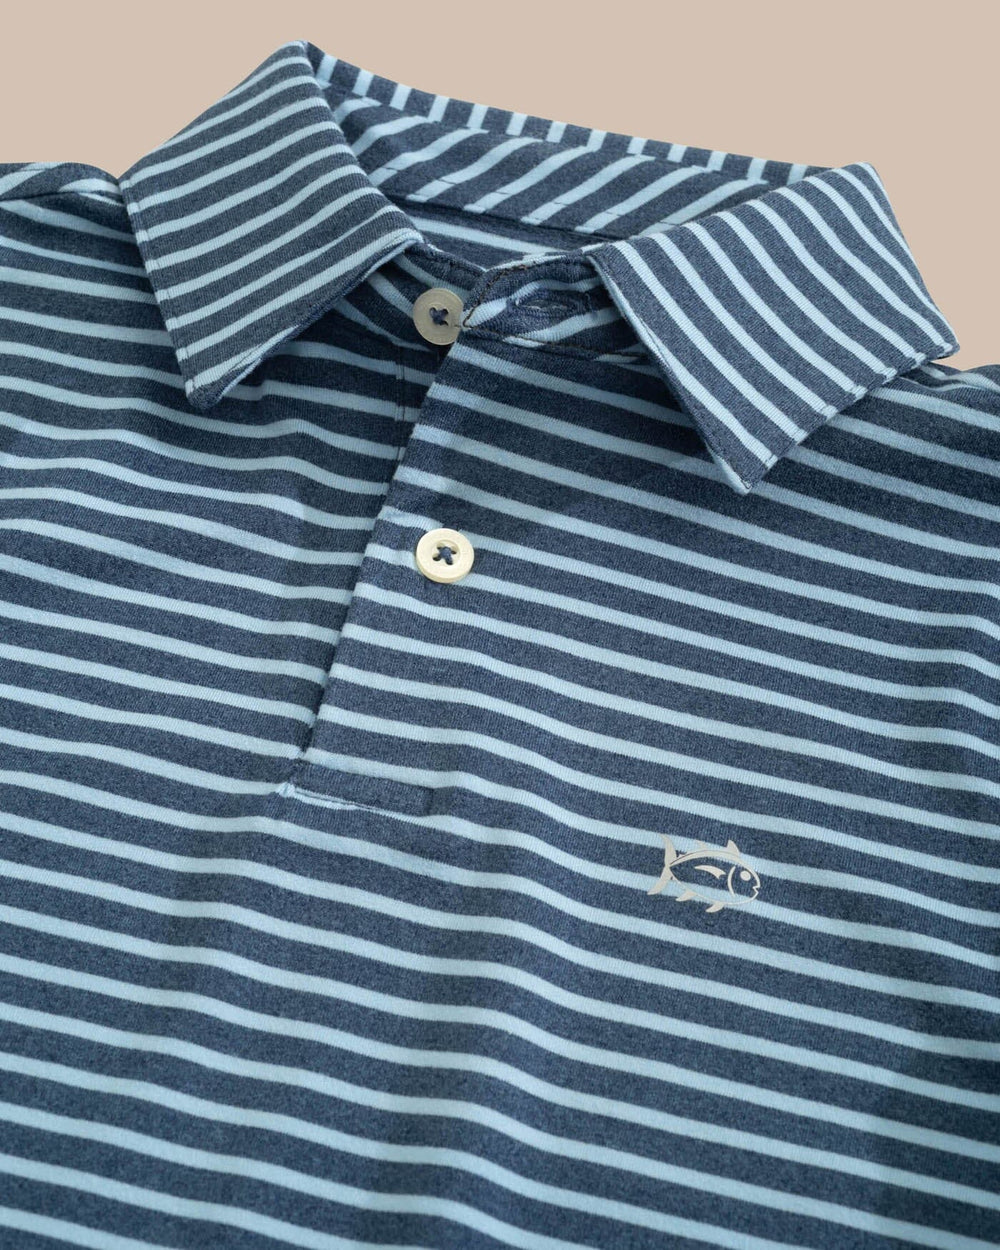 The detail view of the Southern Tide Boys Ryder Heather Marin Stripe Performance Polo Shirt by Southern Tide - Heather Aged Denim